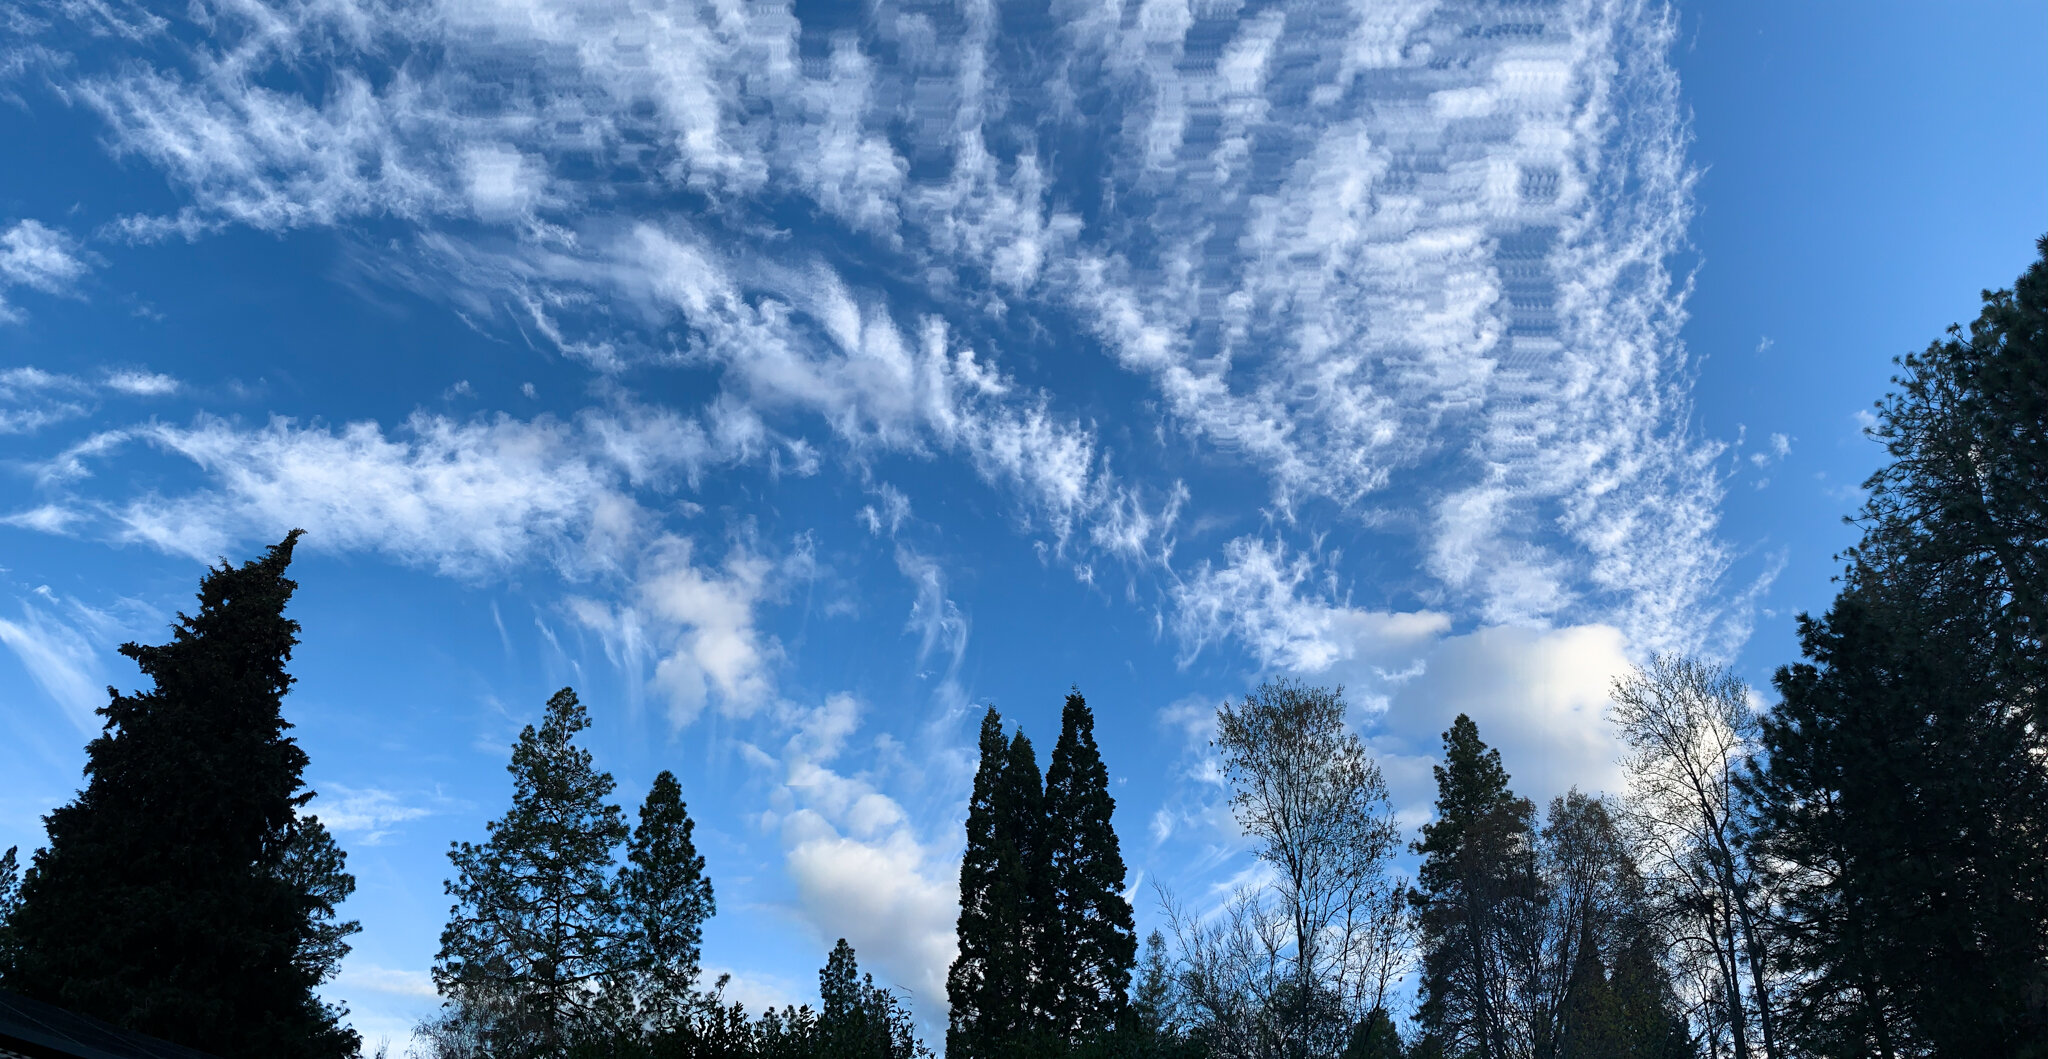  Blue sky with sweeping clouds in the forest by Lenka Vodicka Lenkaland 